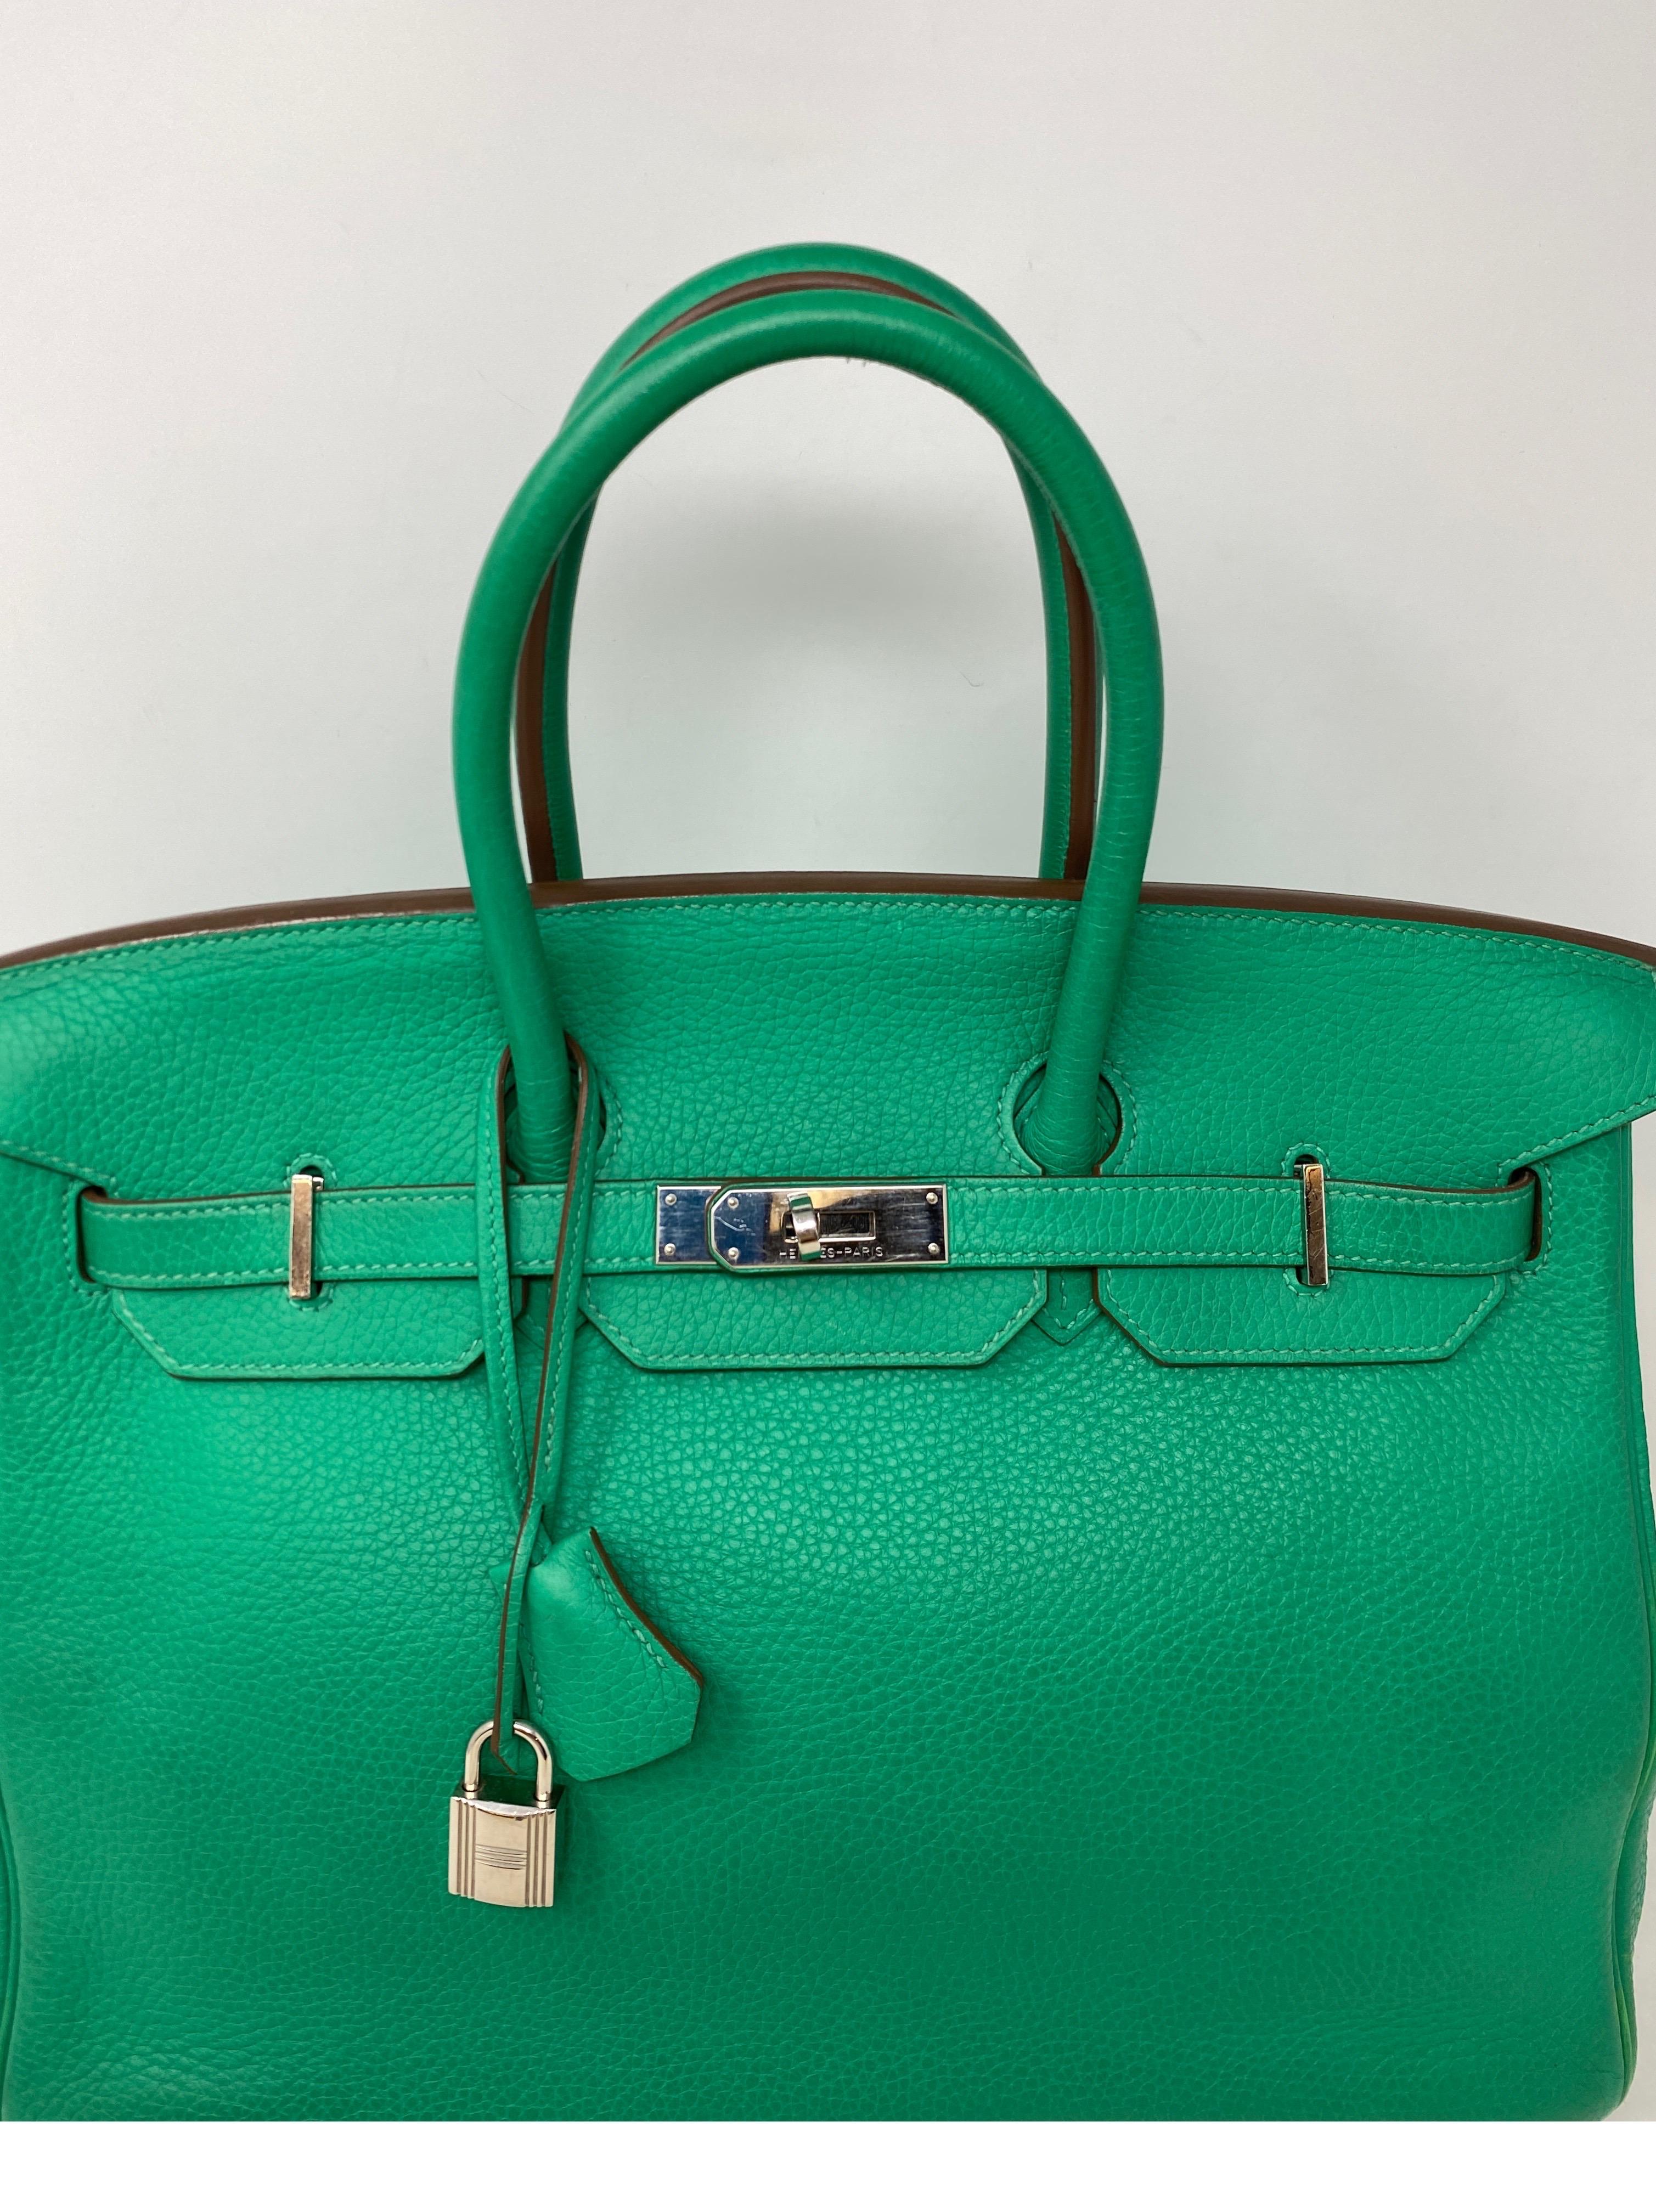 Hermes Menthe Birkin 35 Bag. Excellent condition. Minty green unique color. Palladium hardware. Excellent condition. Clemence leather. Includes clochette, lock ,keys, and dust cover. Guaranteed authentic. 